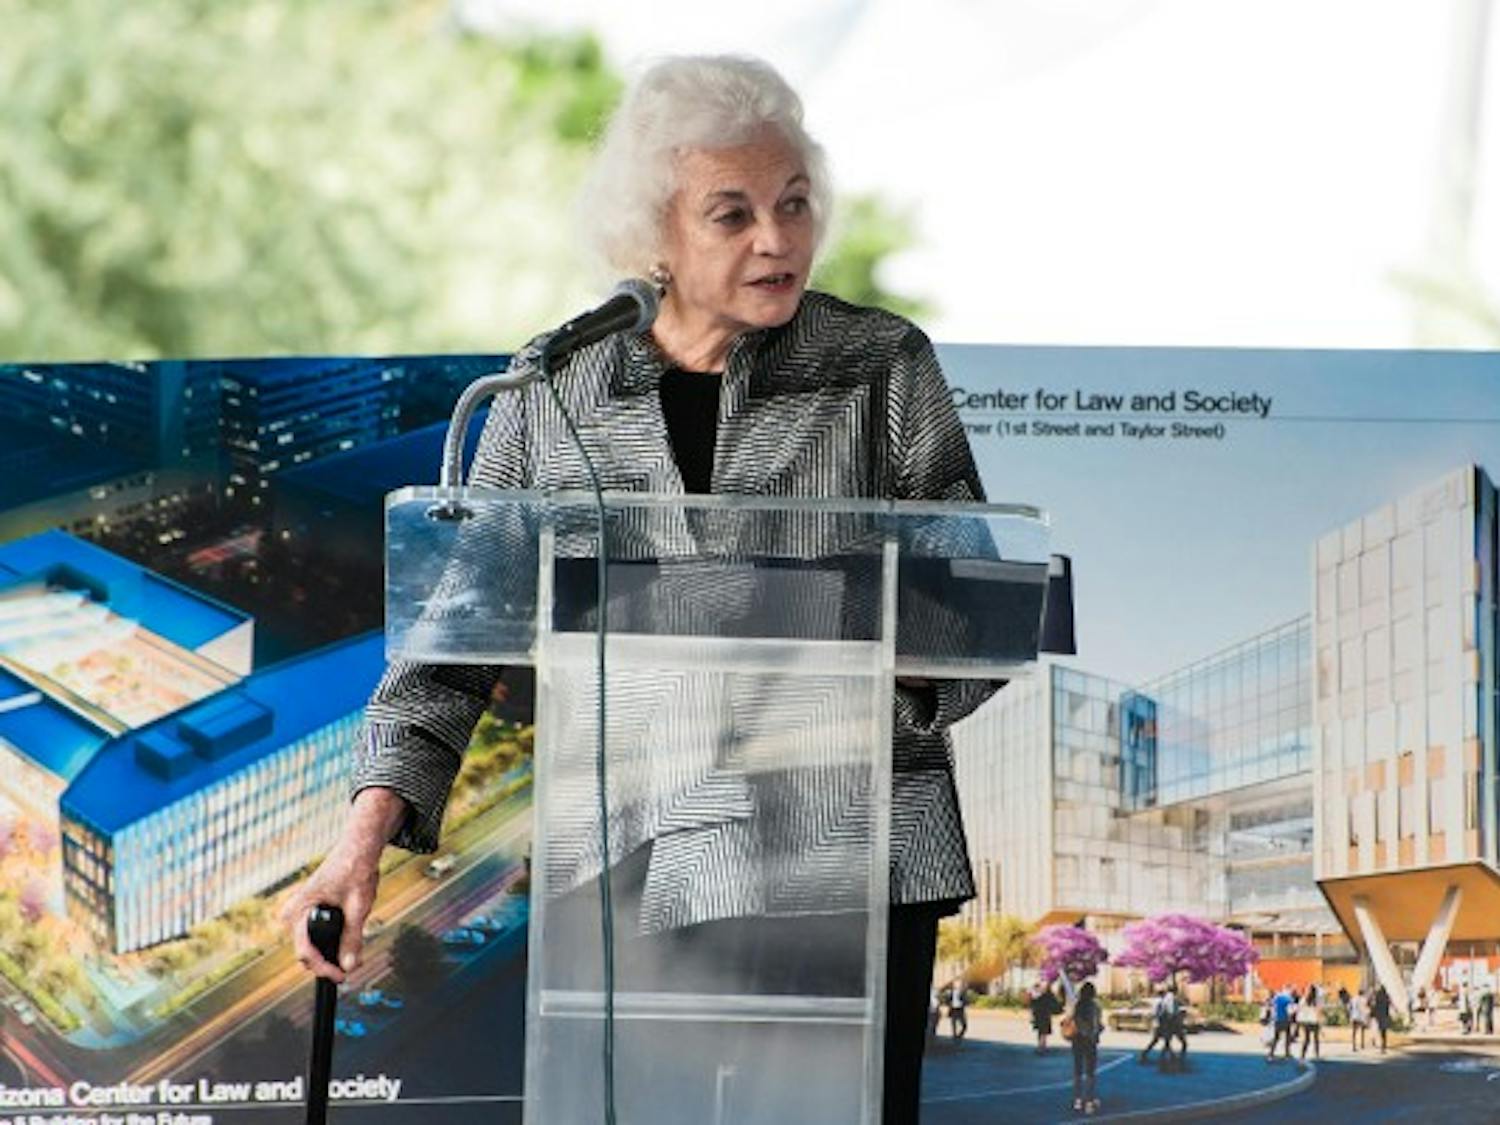 Retired Supreme Court justice Sandra Day O’Connor speaks at the groundbreaking ceremony for the Arizona Center for Law and Society, Thursday, Nov. 13, 2014 in Phoenix. The facility, scheduled to be completed and opened by fall 2016, will host several law-related institutions, including ASU’s Sandra Day O’Connor College of Law.